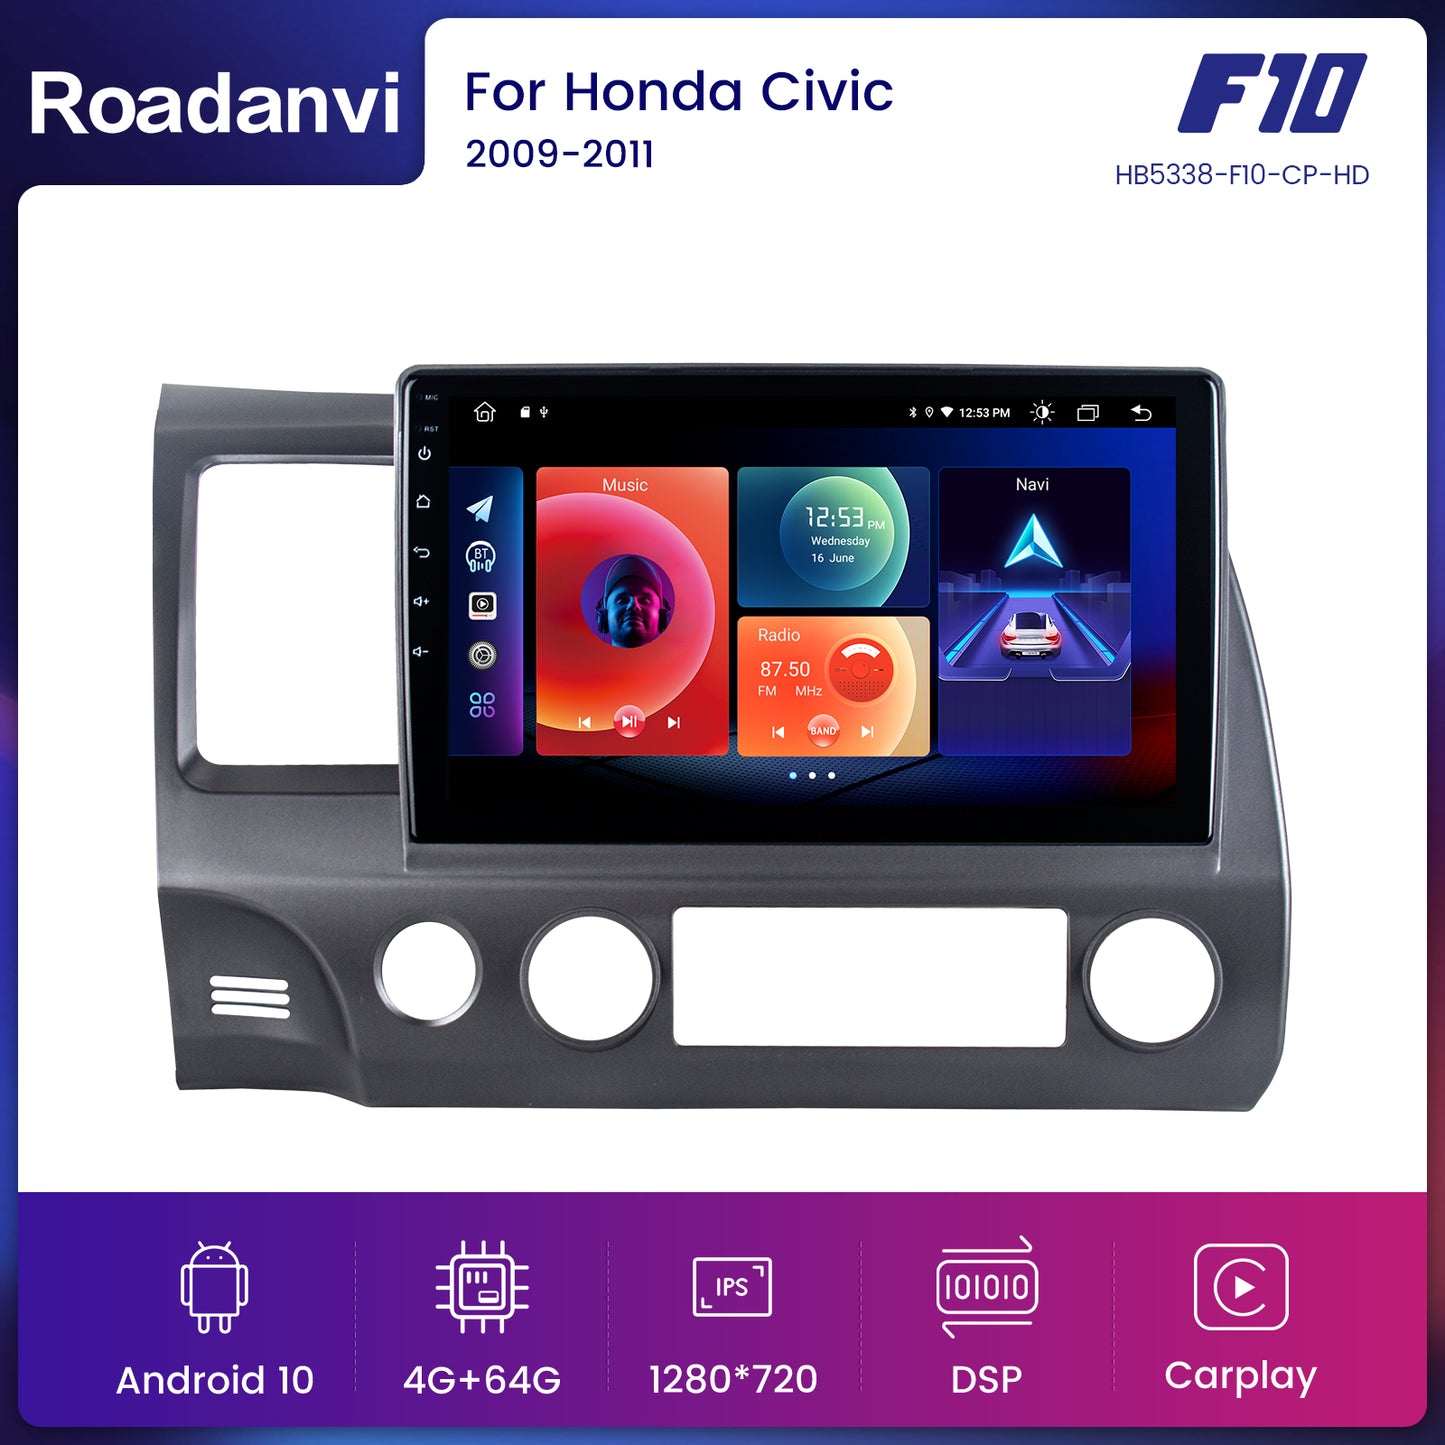 Roadanvi F10 For Honda Civic 2009 2010 2011 Car GPS Navigation 10.2 Inch IPS Screen Android 10 4G RAM 64G ROM Android Auto Stereo